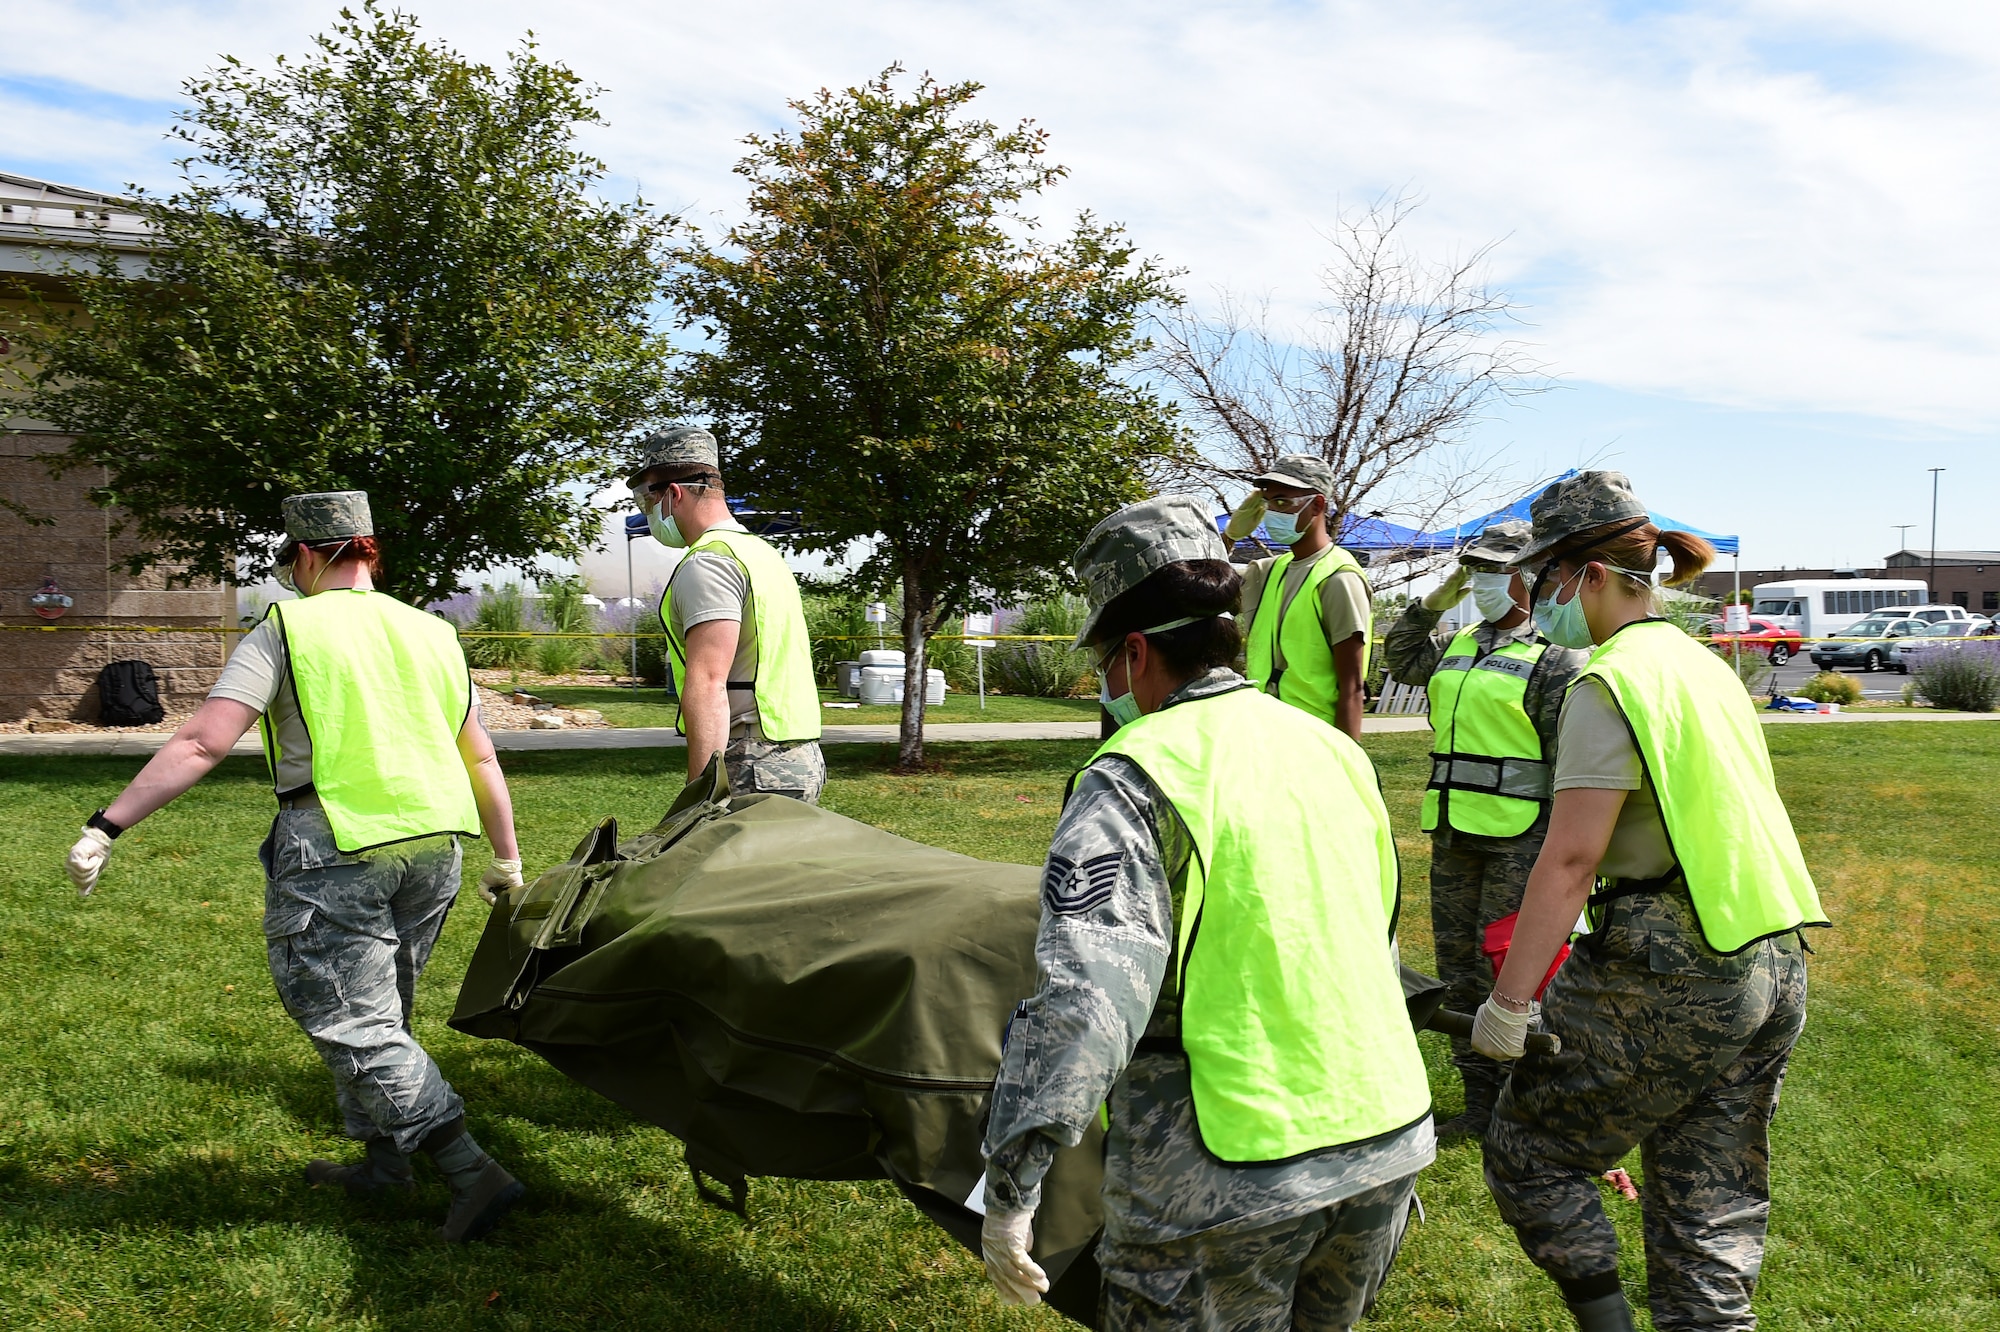 Airmen from the 460th Force Support Squadron carry a simulated corpse out of a cordoned area as part of search and recovery training on July 19, 2018, on Buckley Air Force Base, Colorado. The training ensures Airmen are prepared for crisis response situations. (U.S. Air Force photo by Senior Airman AJ Duprey)